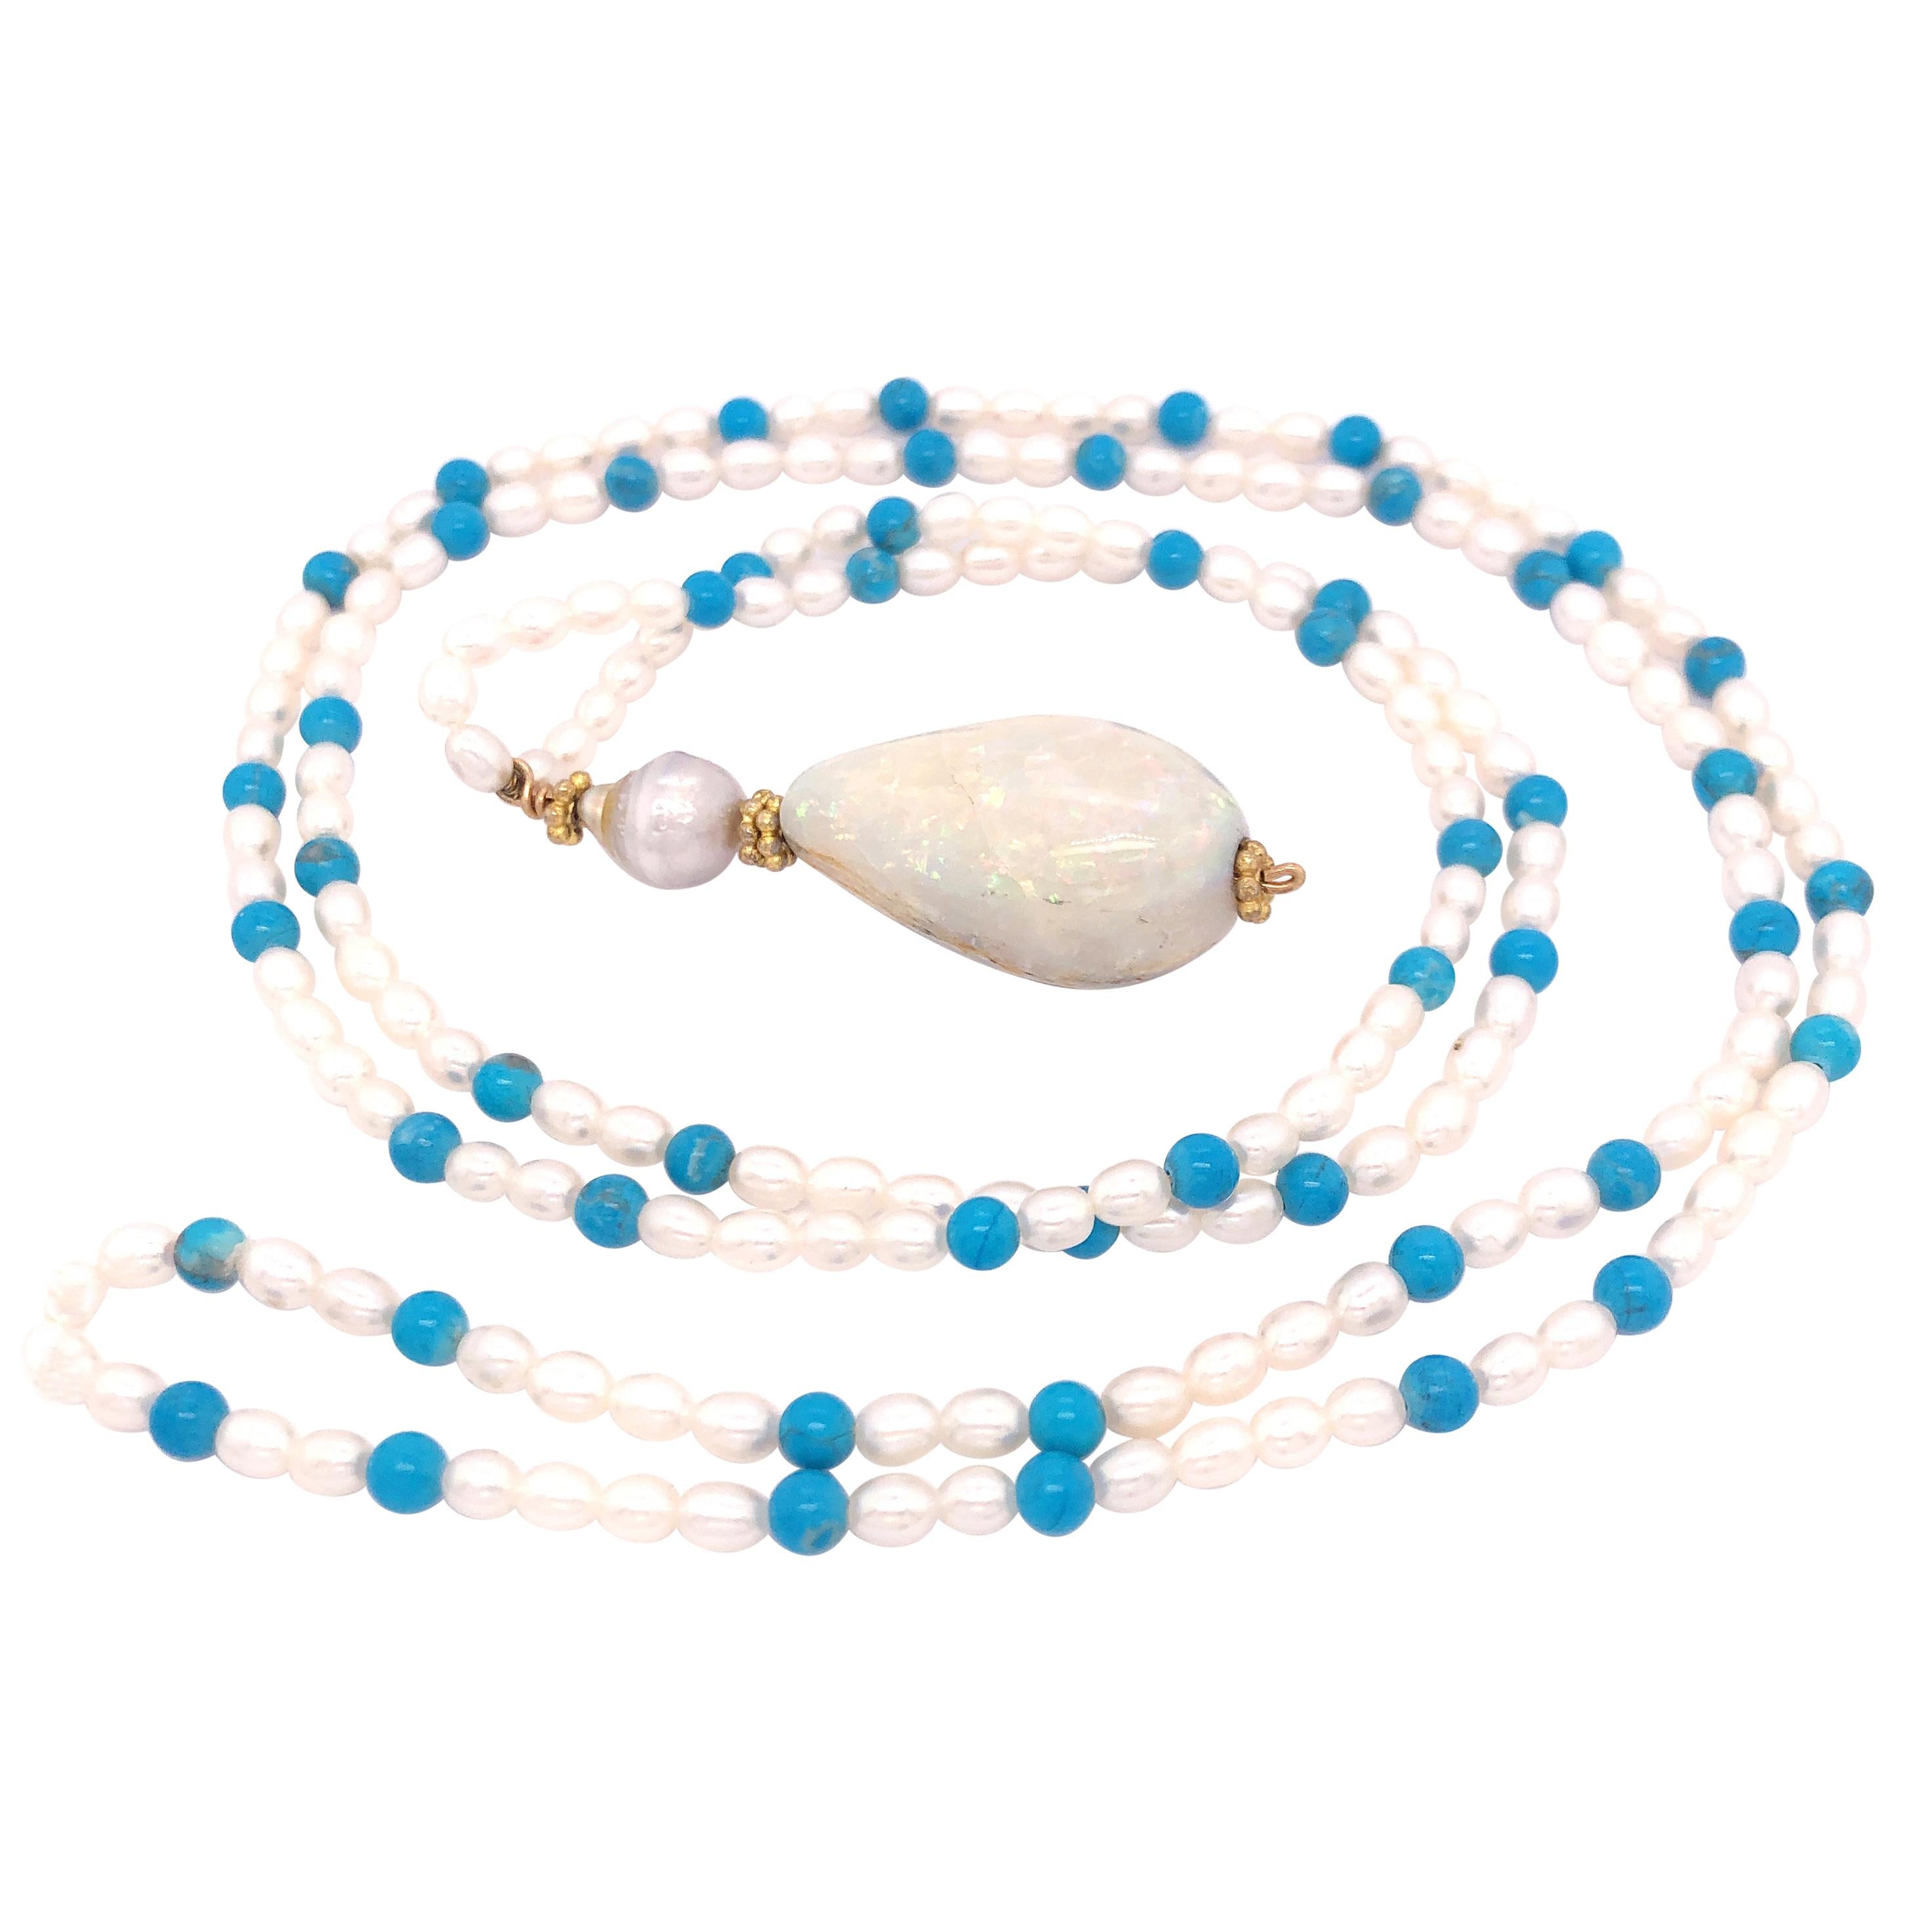 Large Opal Pearl and Turquoise Necklace